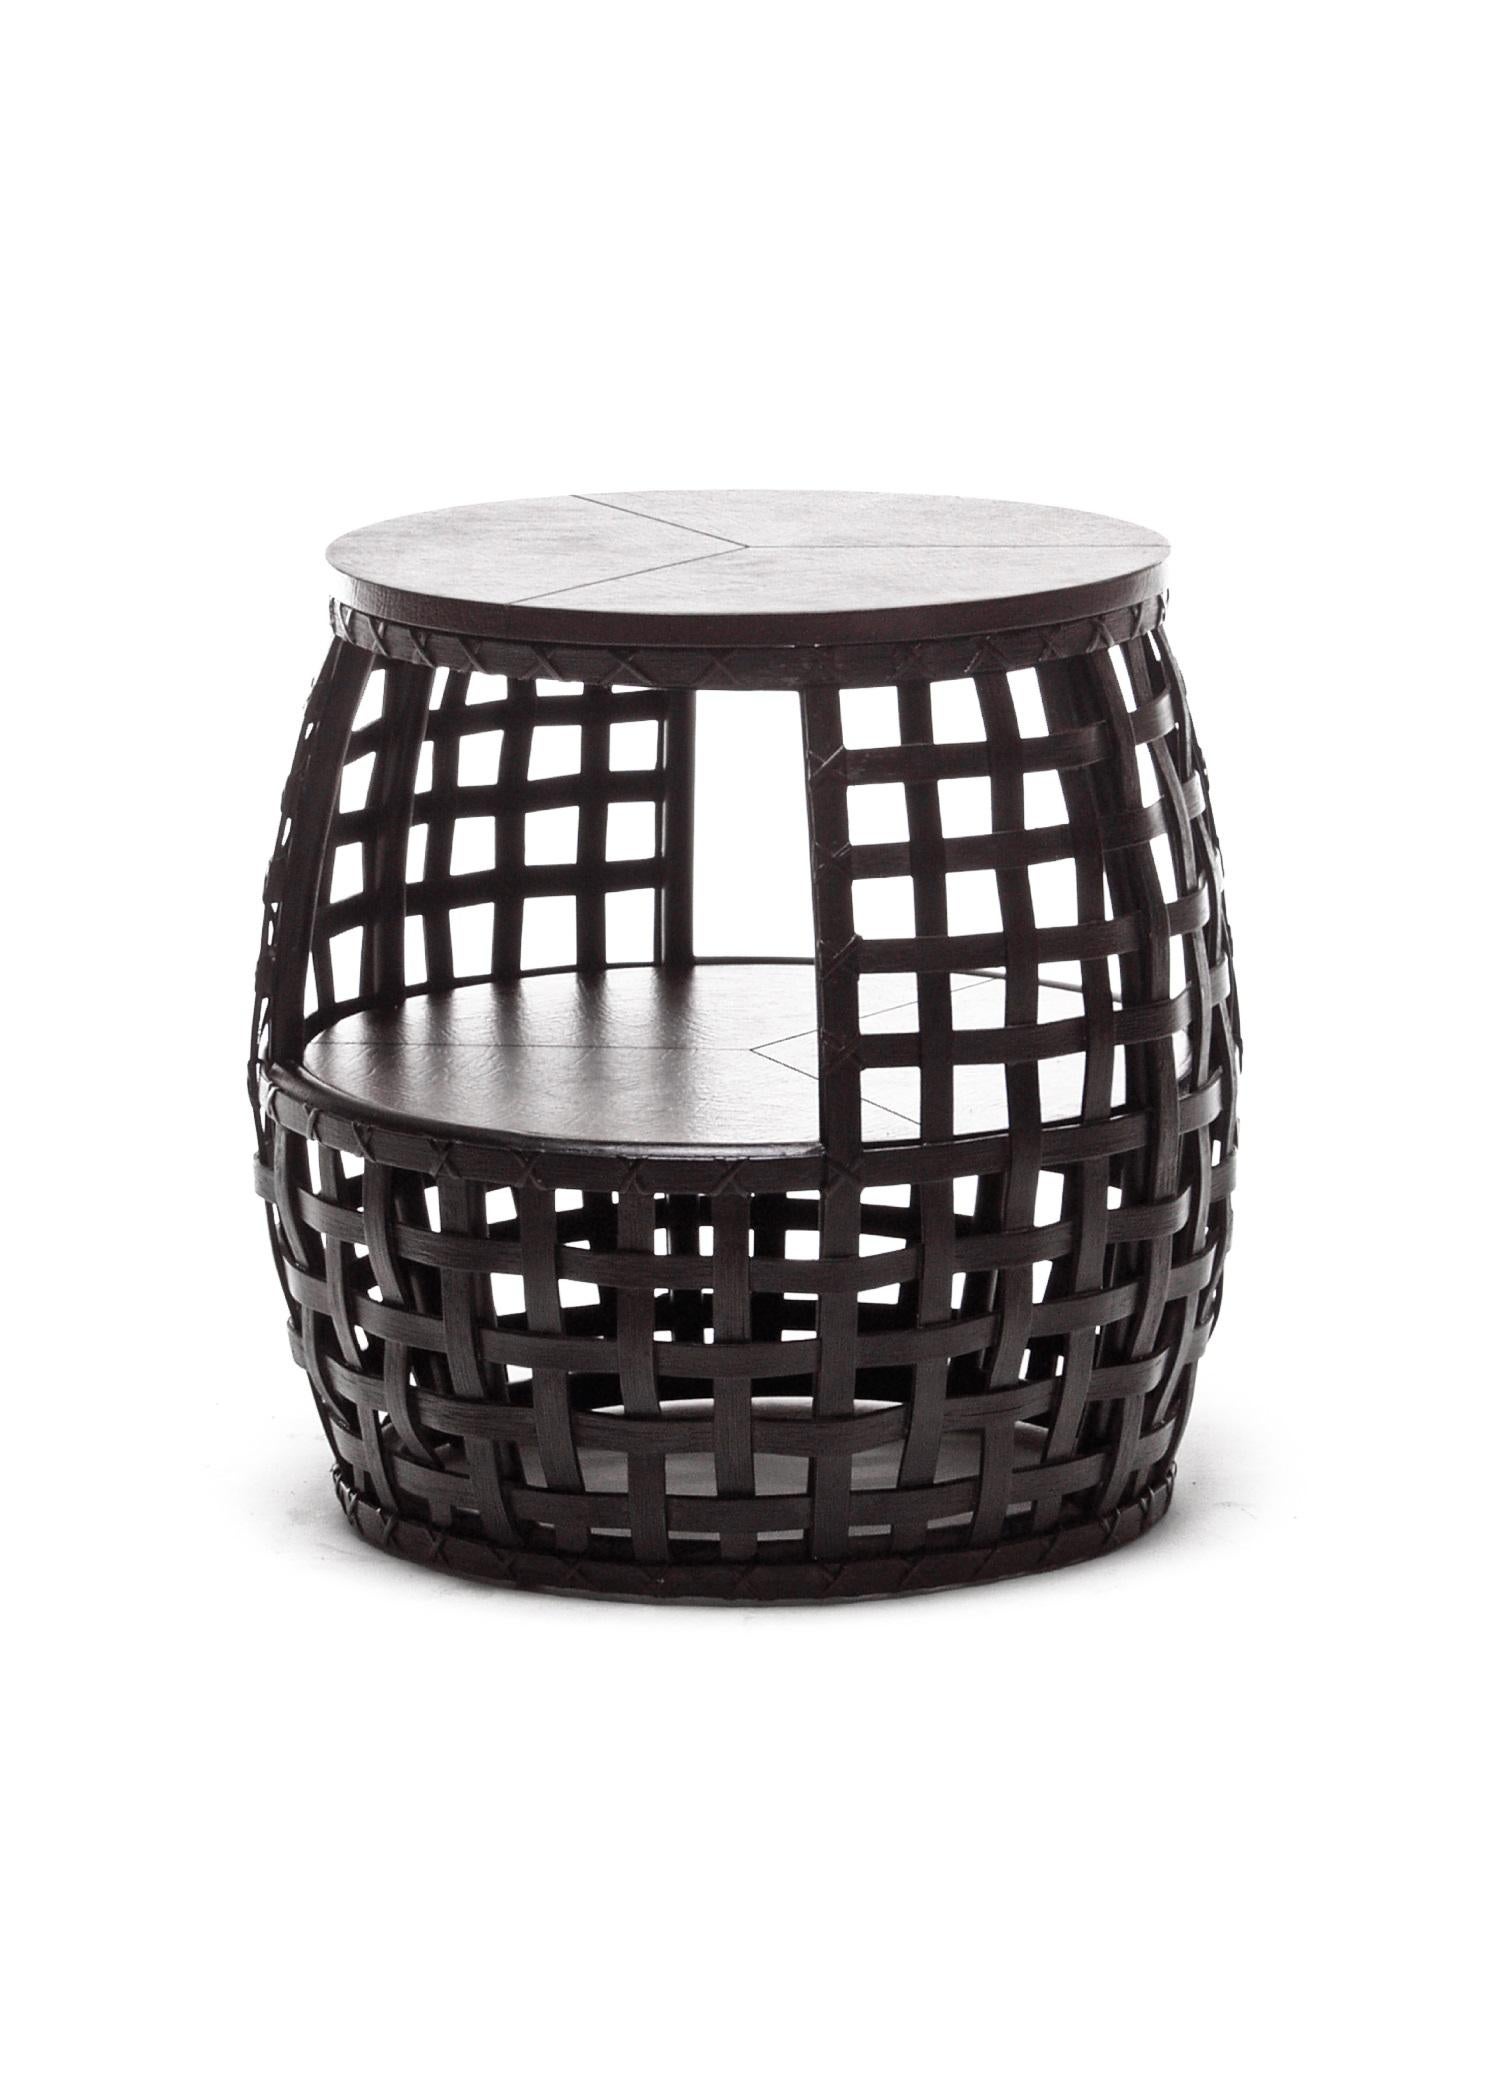 Indoor matilda end table by Kenneth Cobonpue.
Materials: Rattan. Glass.
Also available in other colors and for outdoors. 
Dimensions: 
Glass top diameter 45cm x height 6mm shelve diameter 50.5cm x height 6mm
Table diameter 56cm x height